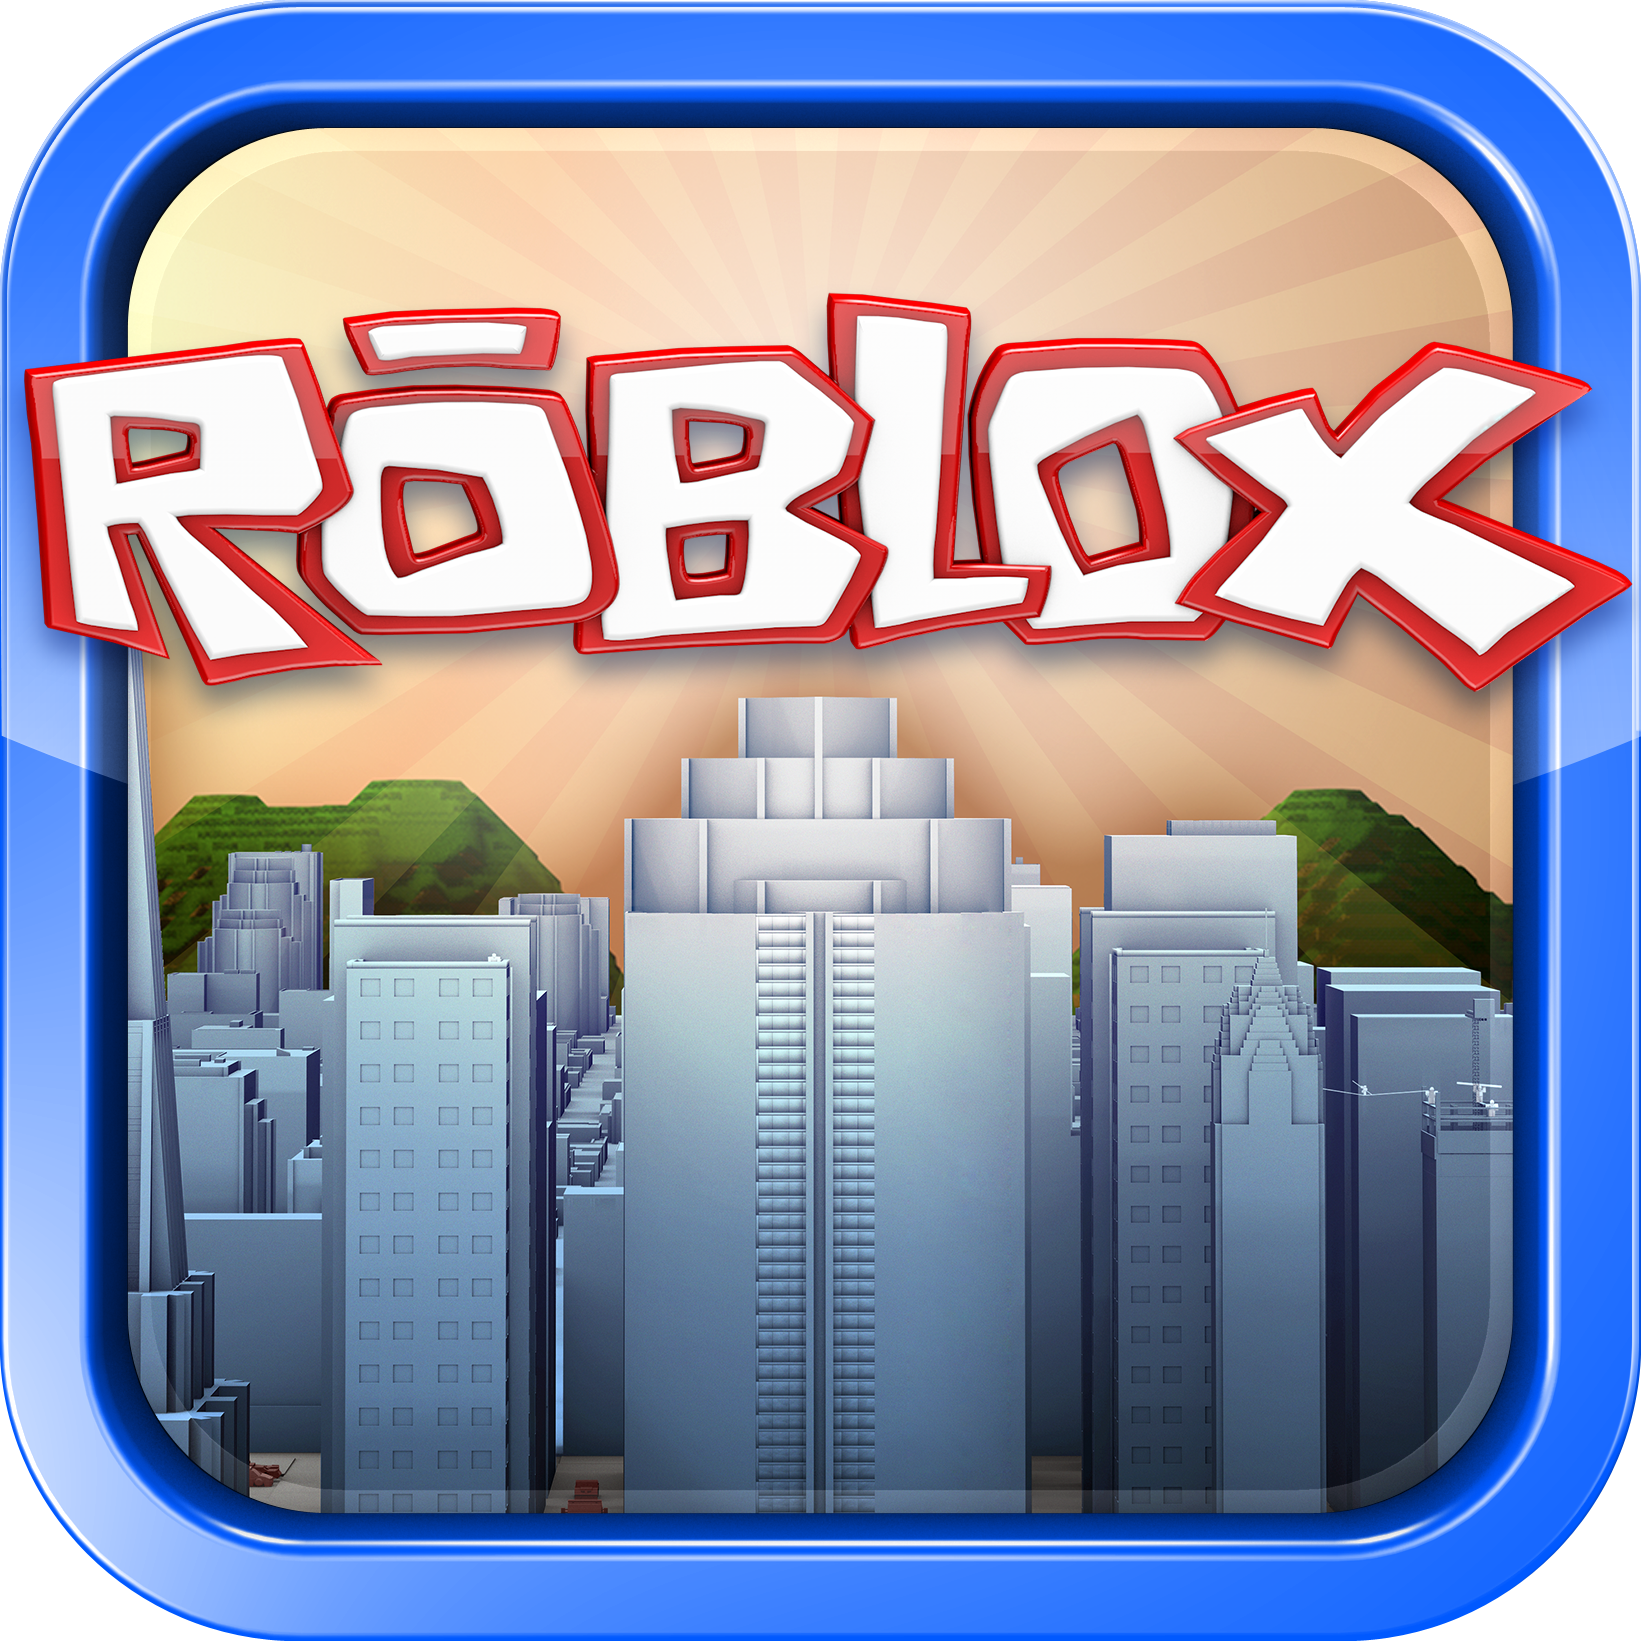 Roblox free download on pc